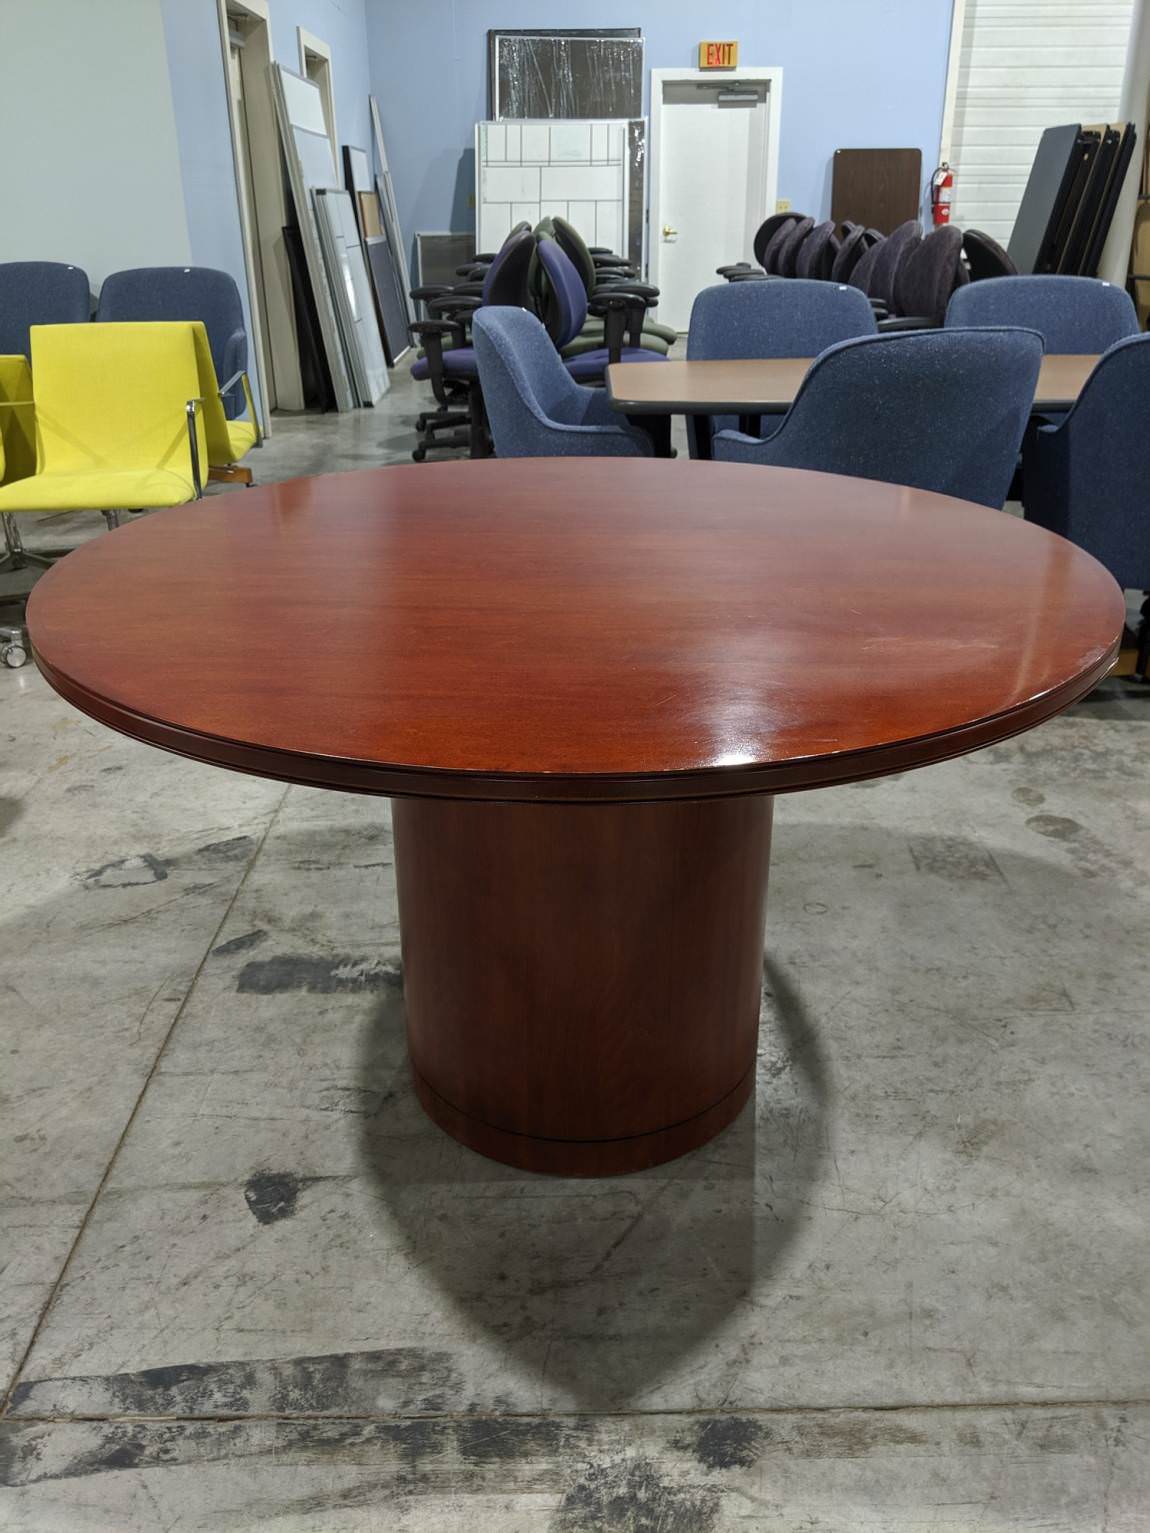 48” Round Solid Wood Cherry Conference Meeting Table